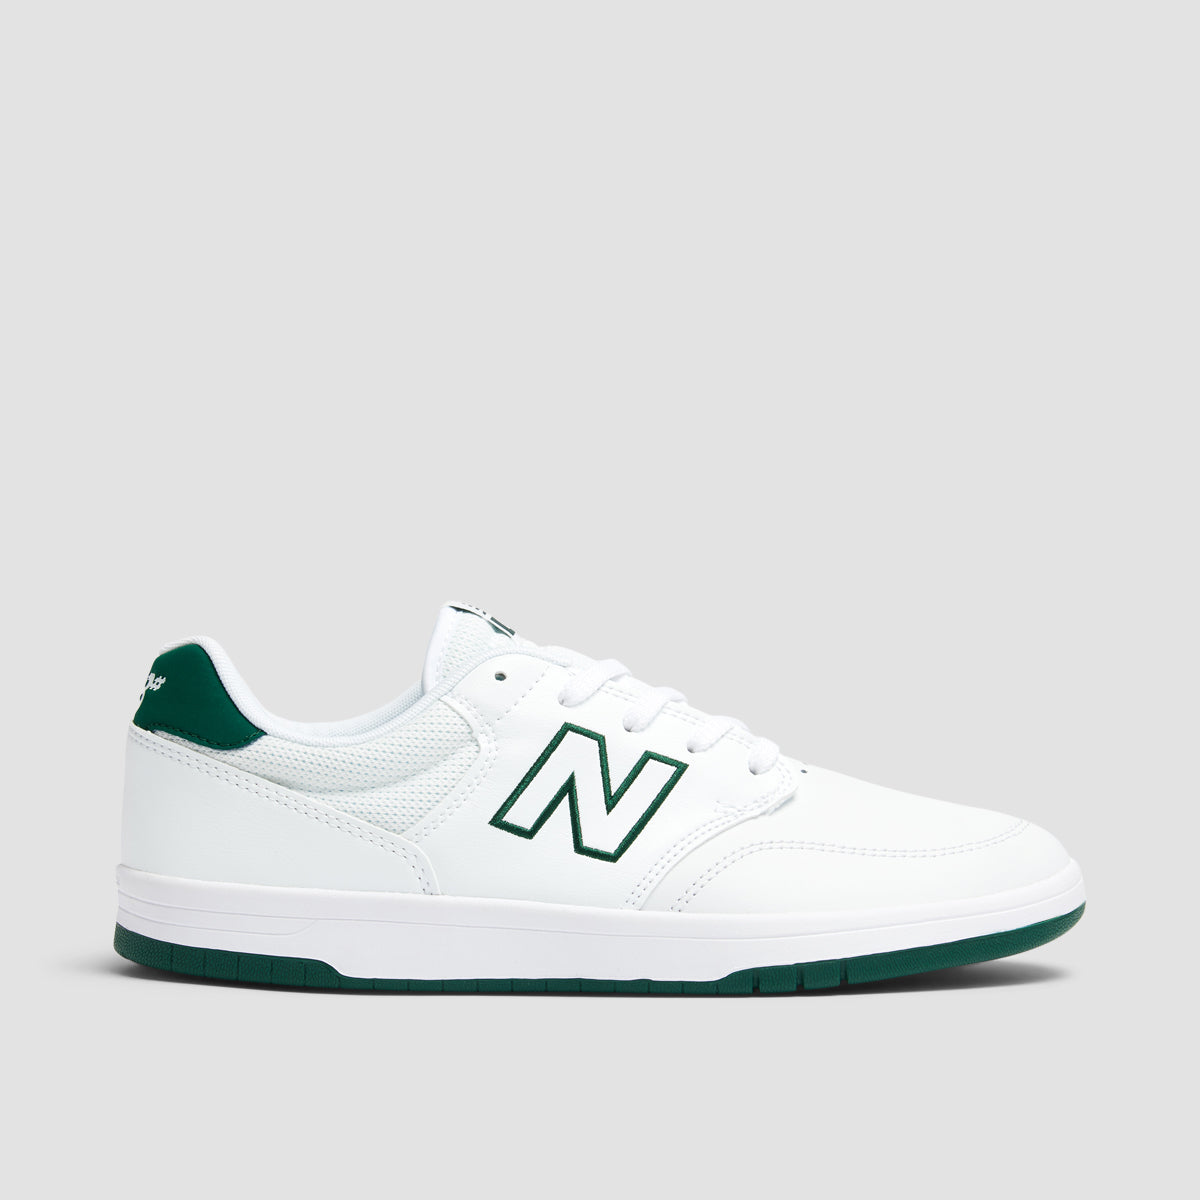 New Balance Numeric 425 Shoes - White/Green